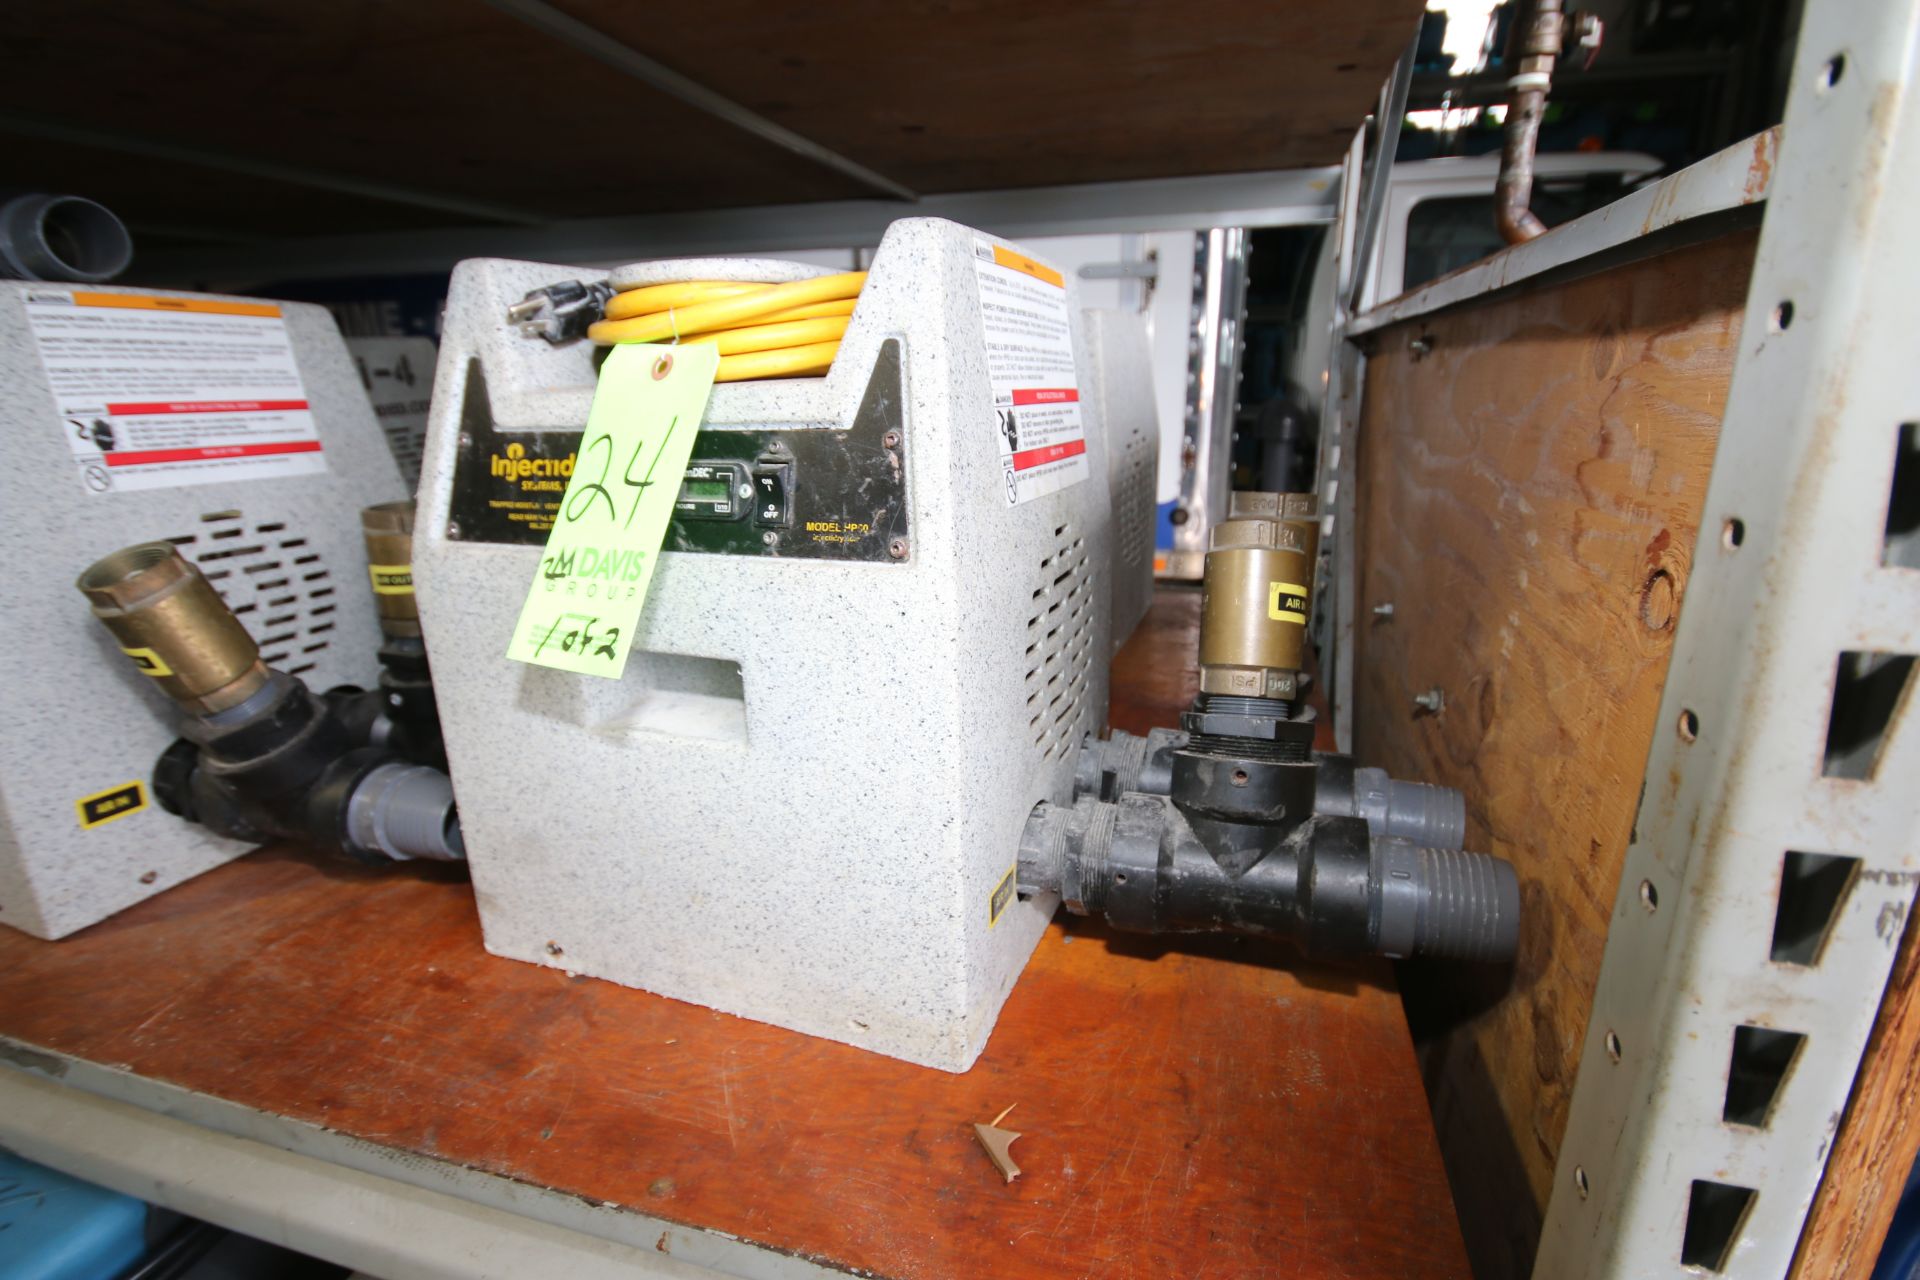 2007 Injectidry Systems Inc. Trapped Moisture Ventilating Systems, Model HP60, Type RT, S/N 6081 and